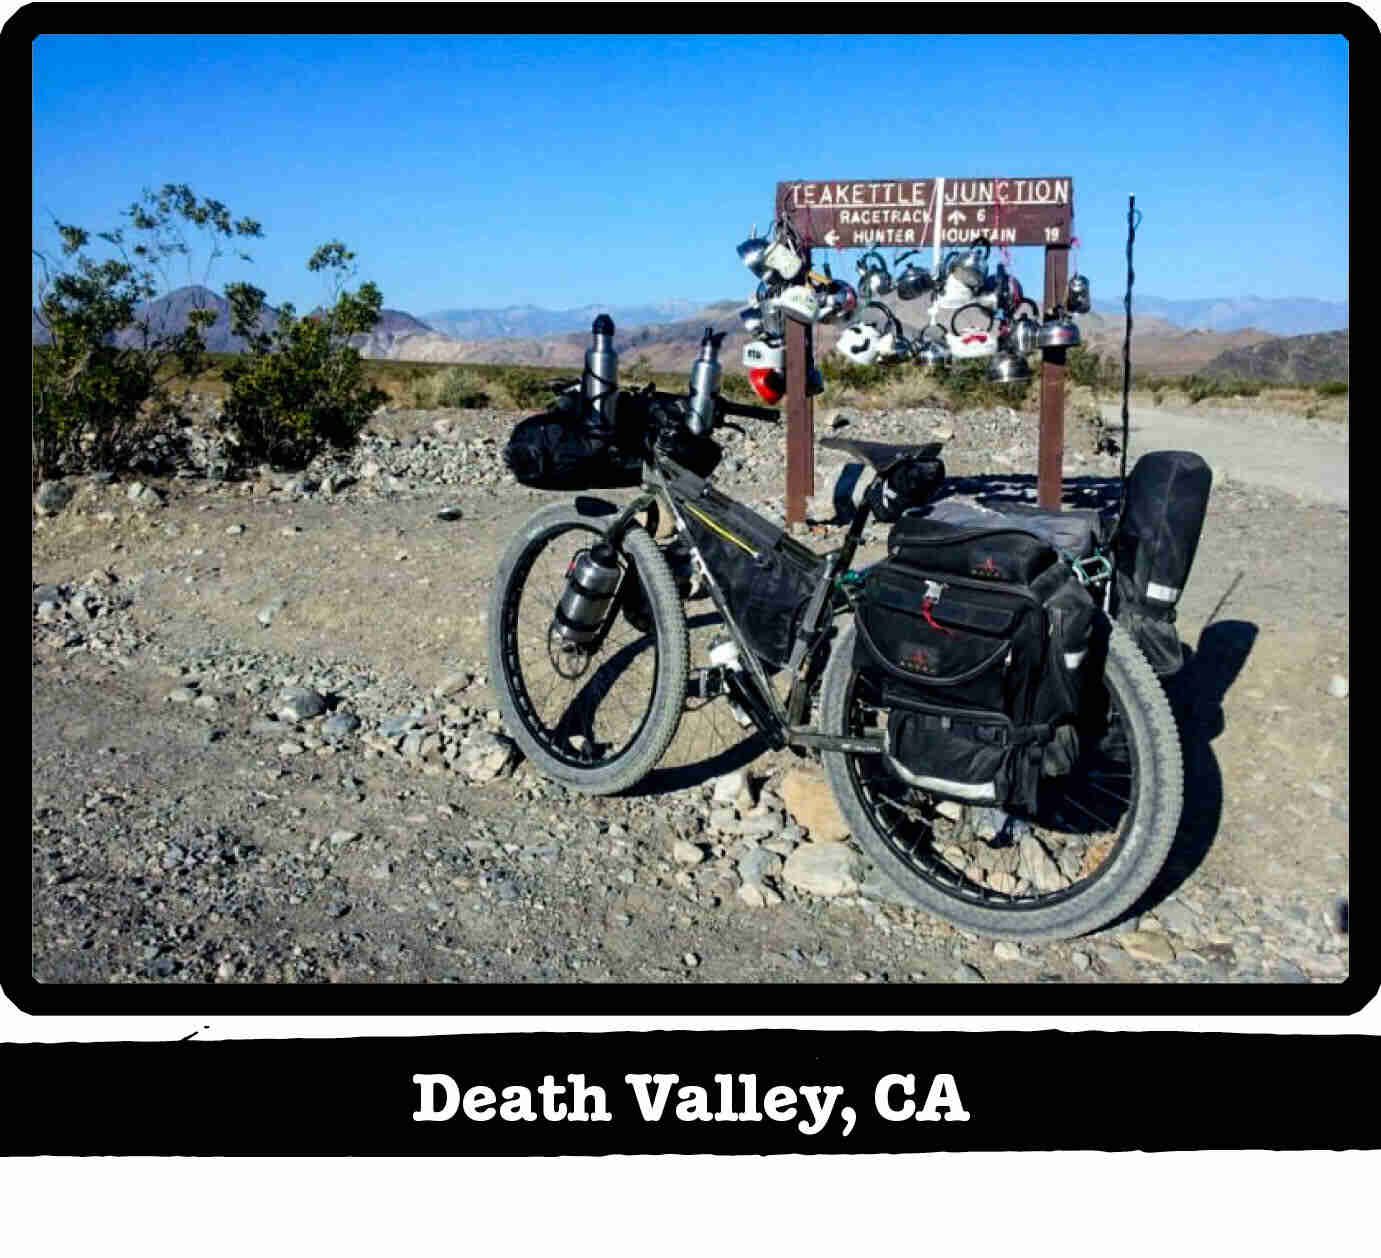 Left side view of a Surly ECR fat bike on a rocky trail, with hills in the background - Death Valley, CA tag below image